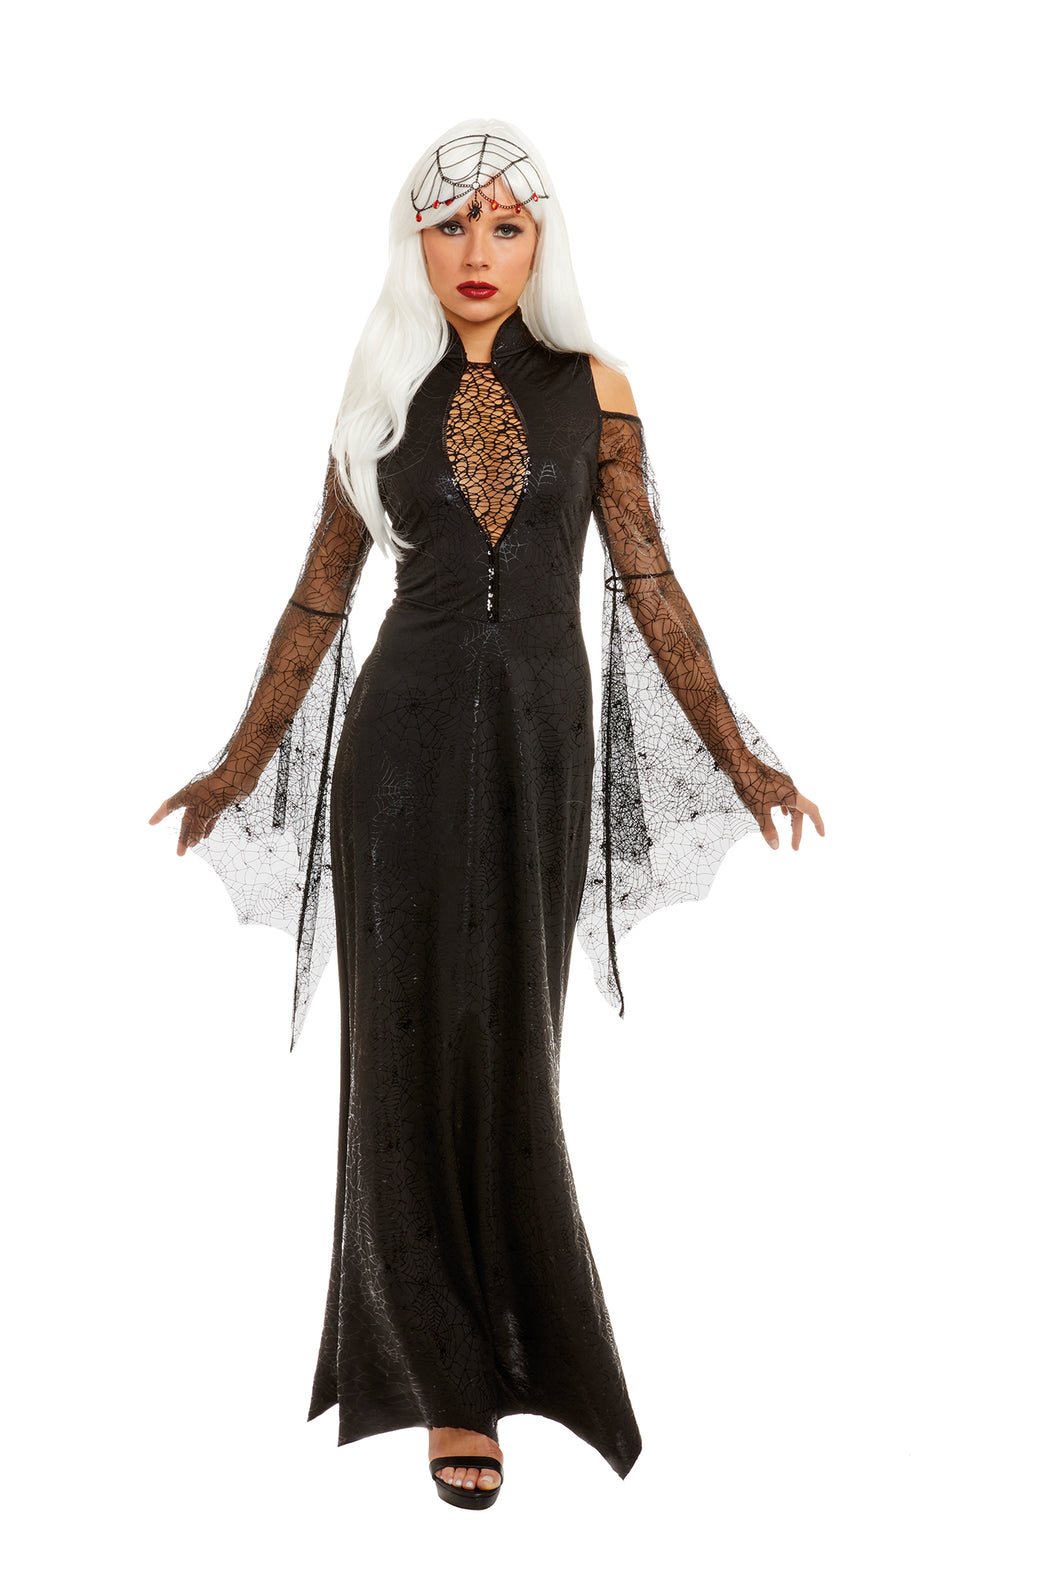 Spiderweb printed gown